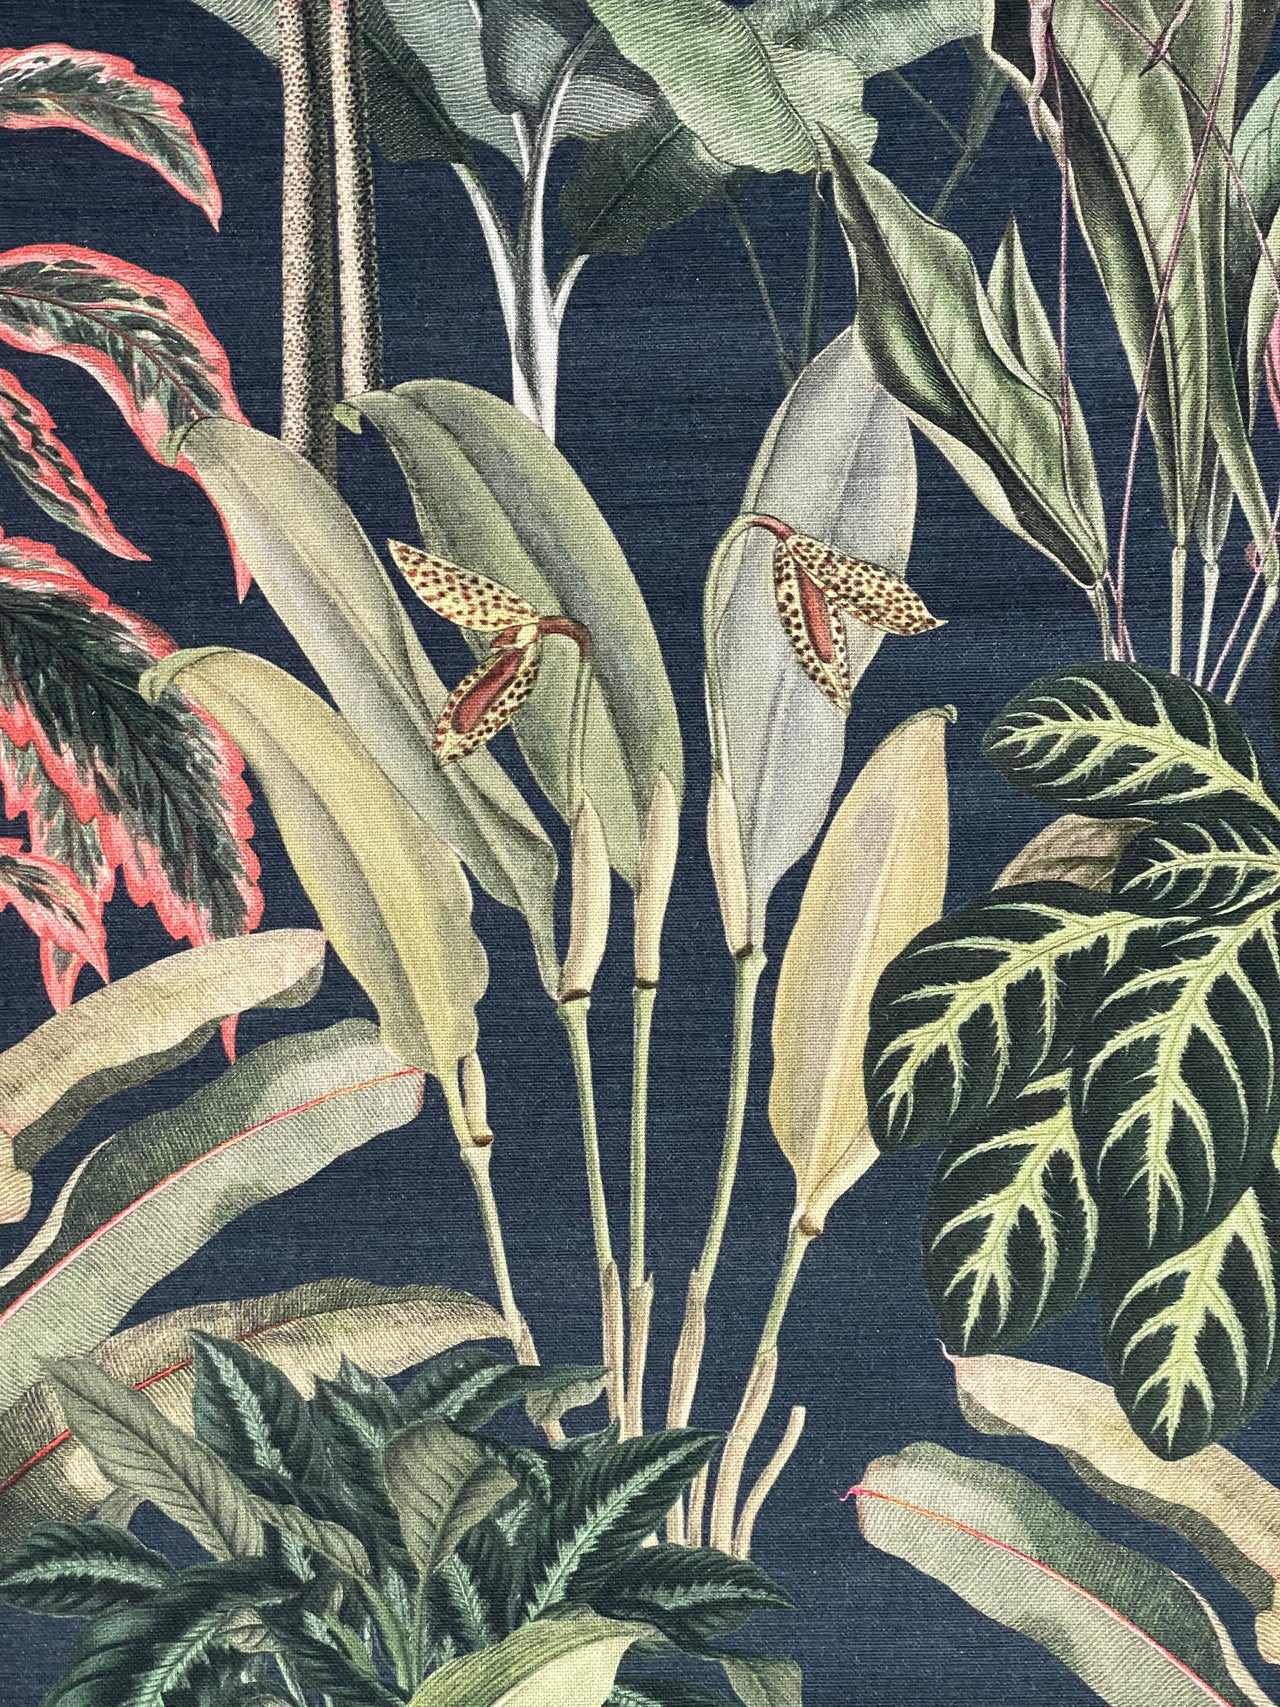 Exquisite Rainforest Cotton Fabric - Bring the Outdoors Inside